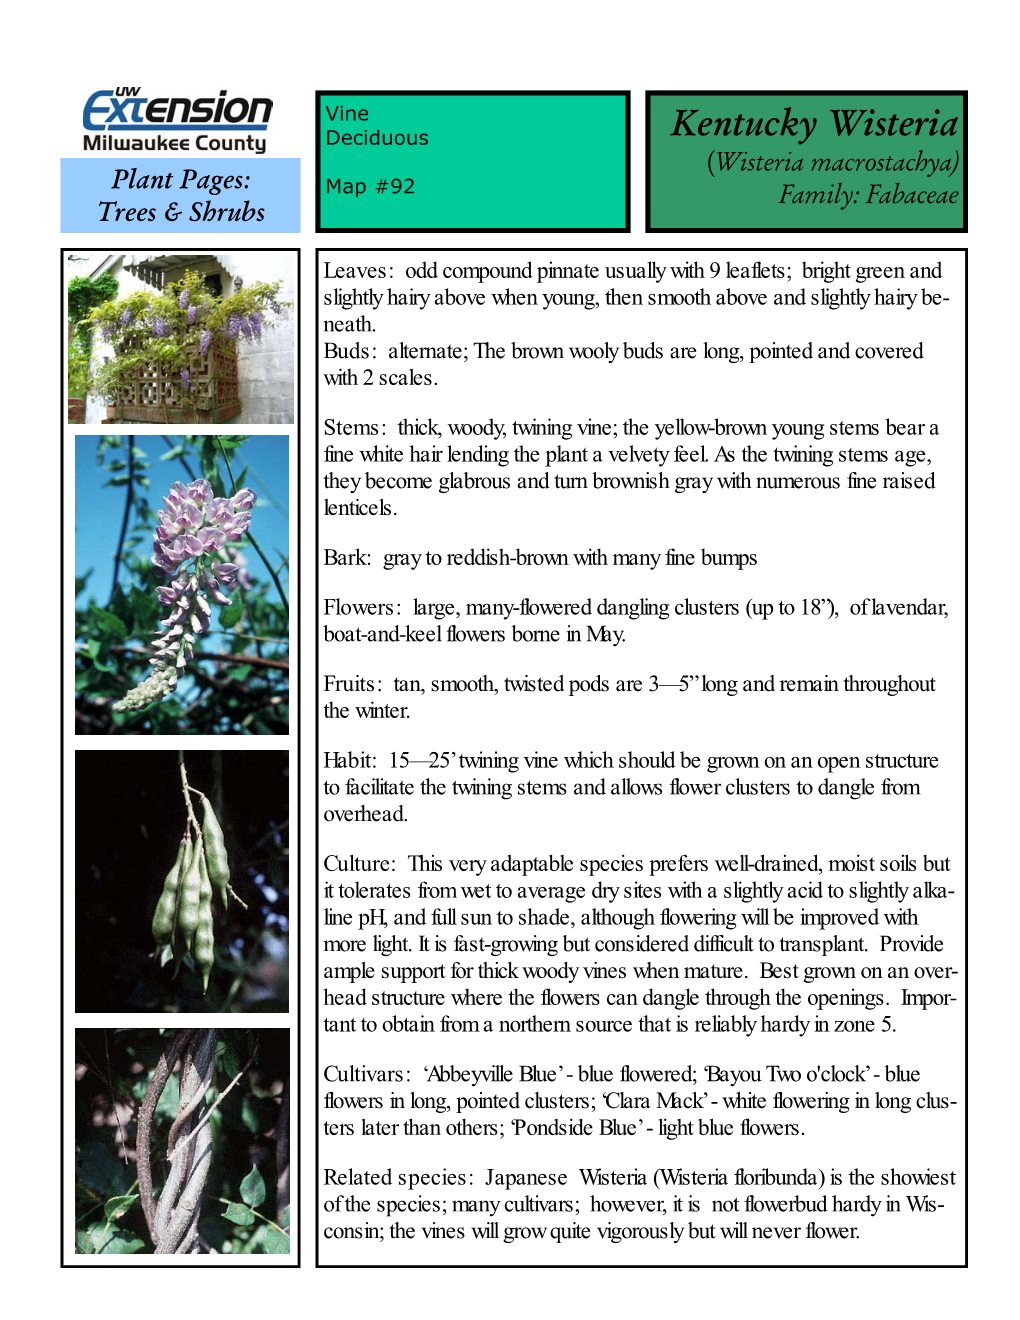 Kentucky Wisteria (Wisteria Macrostachya) Plant Pages: Map #92 Family: Fabaceae Trees & Shrubs